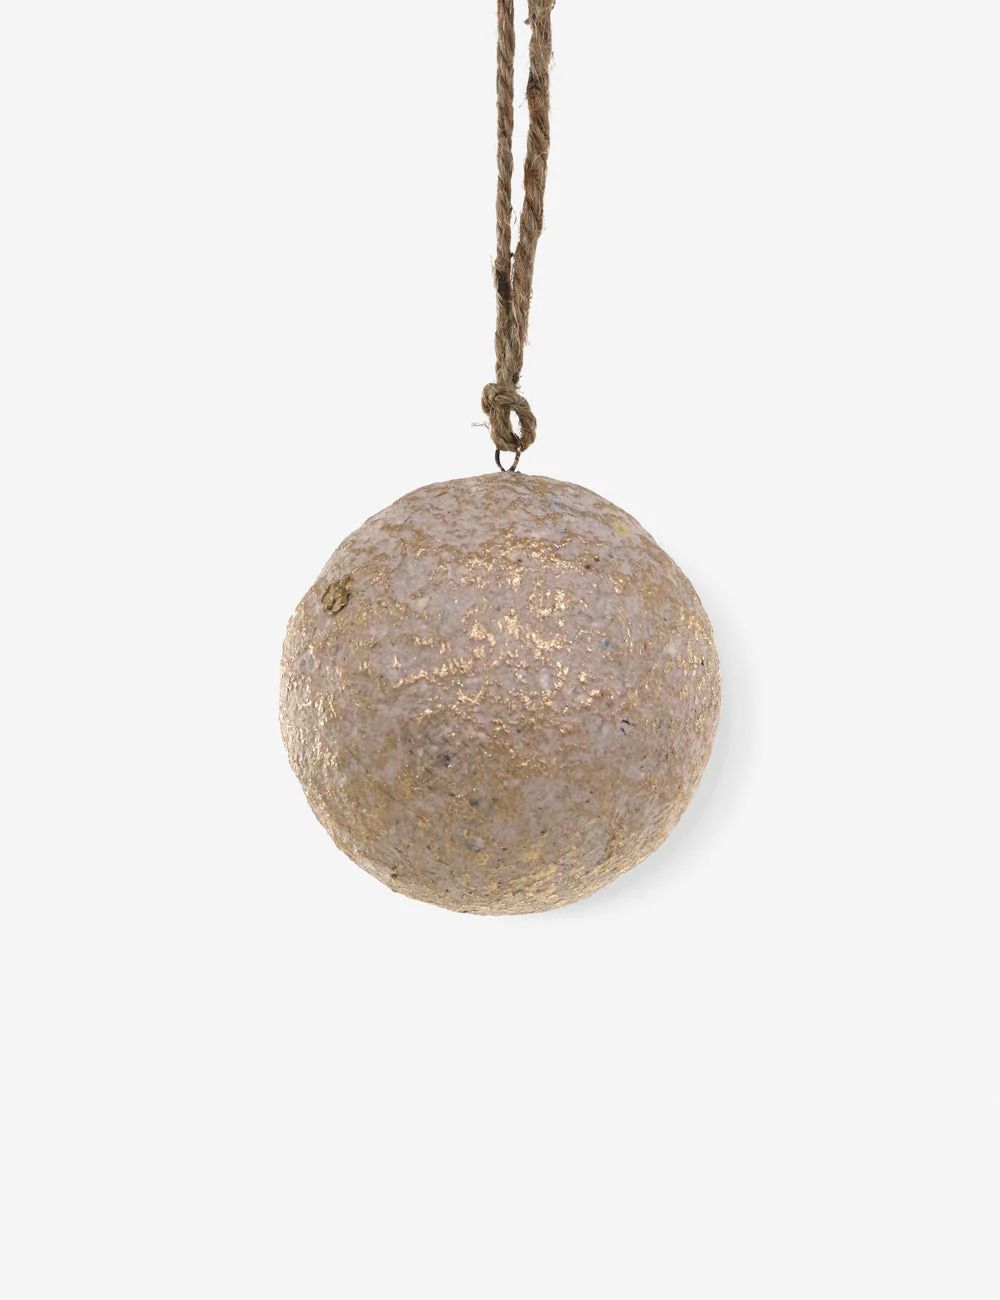 Paper Mache Ball Ornament by Cody Foster and Co | Lulu and Georgia 